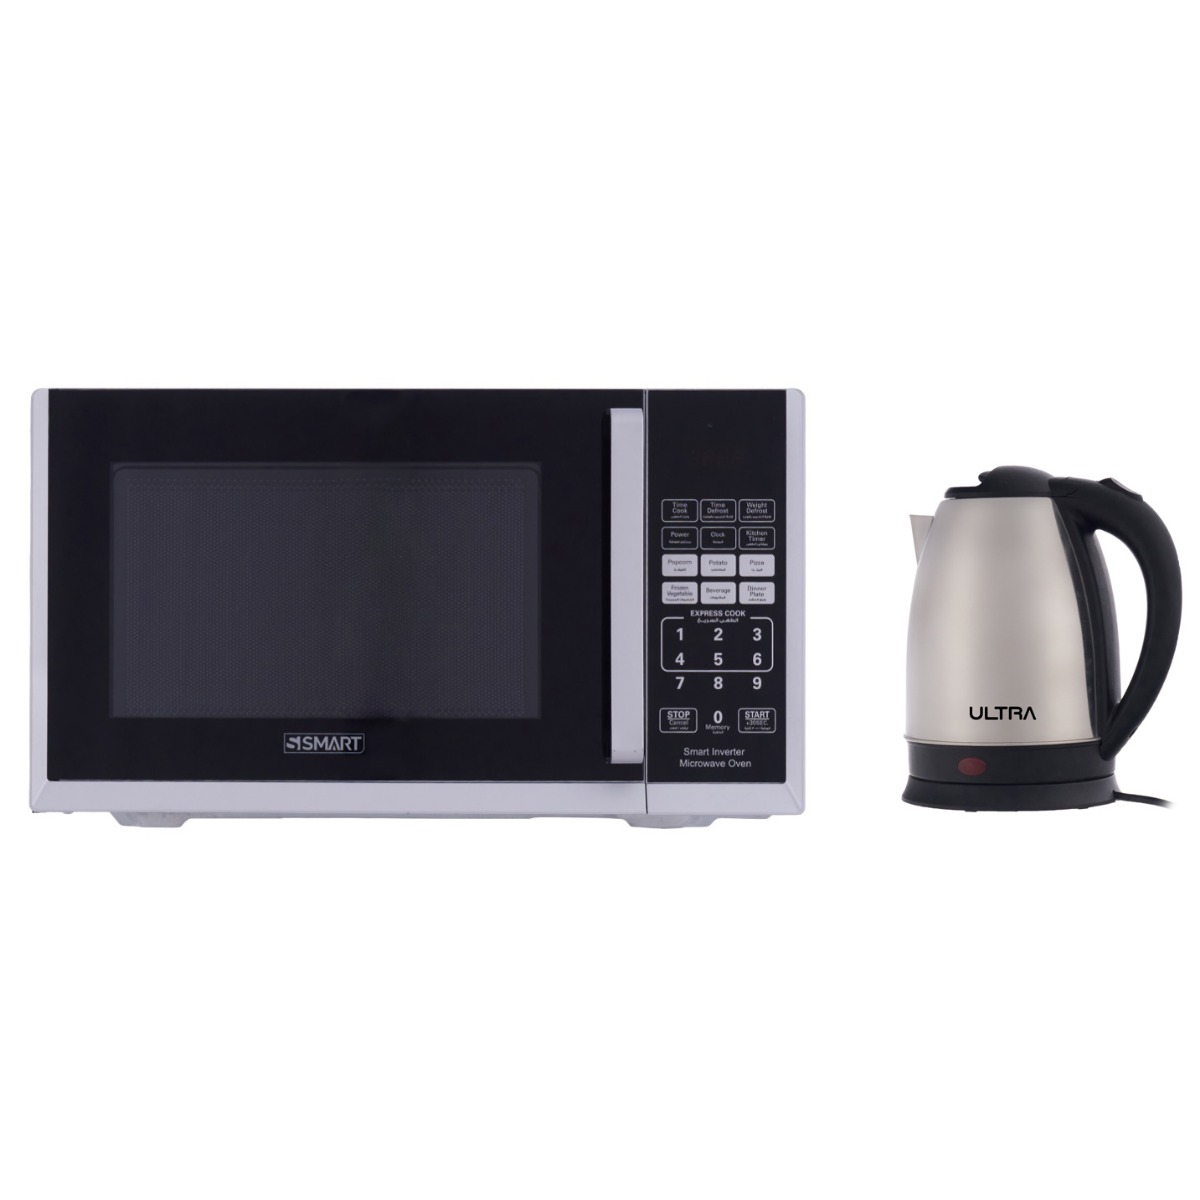 Smart Microwave, 25 Liters, Silver - SMW251ABV With Ultra Electric Kettle, 2 Liters, 1500 Watt, Black and Stainless Steel - UKS15EE1